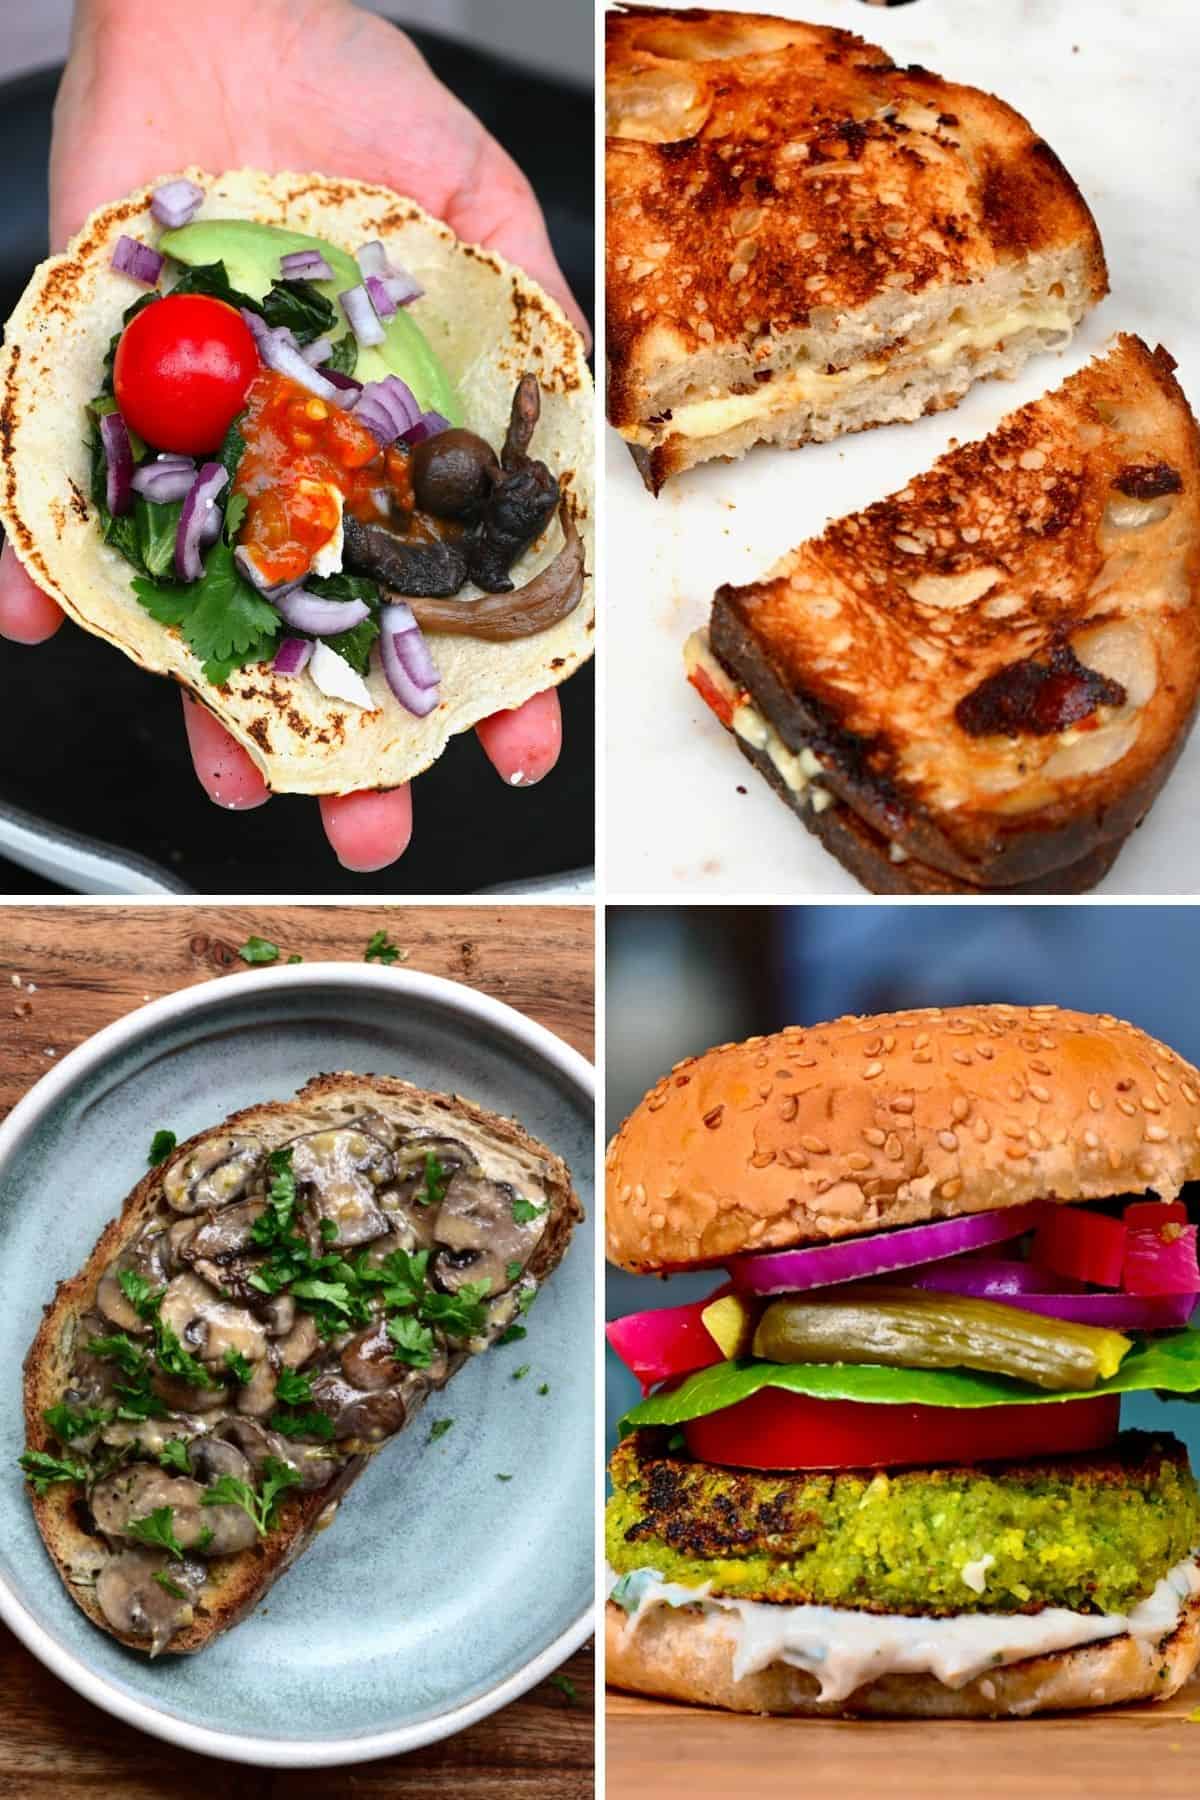 https://www.alphafoodie.com/wp-content/uploads/2022/09/Hot-Lunch-Ideas-Toasts-tacos-and-buns.jpeg